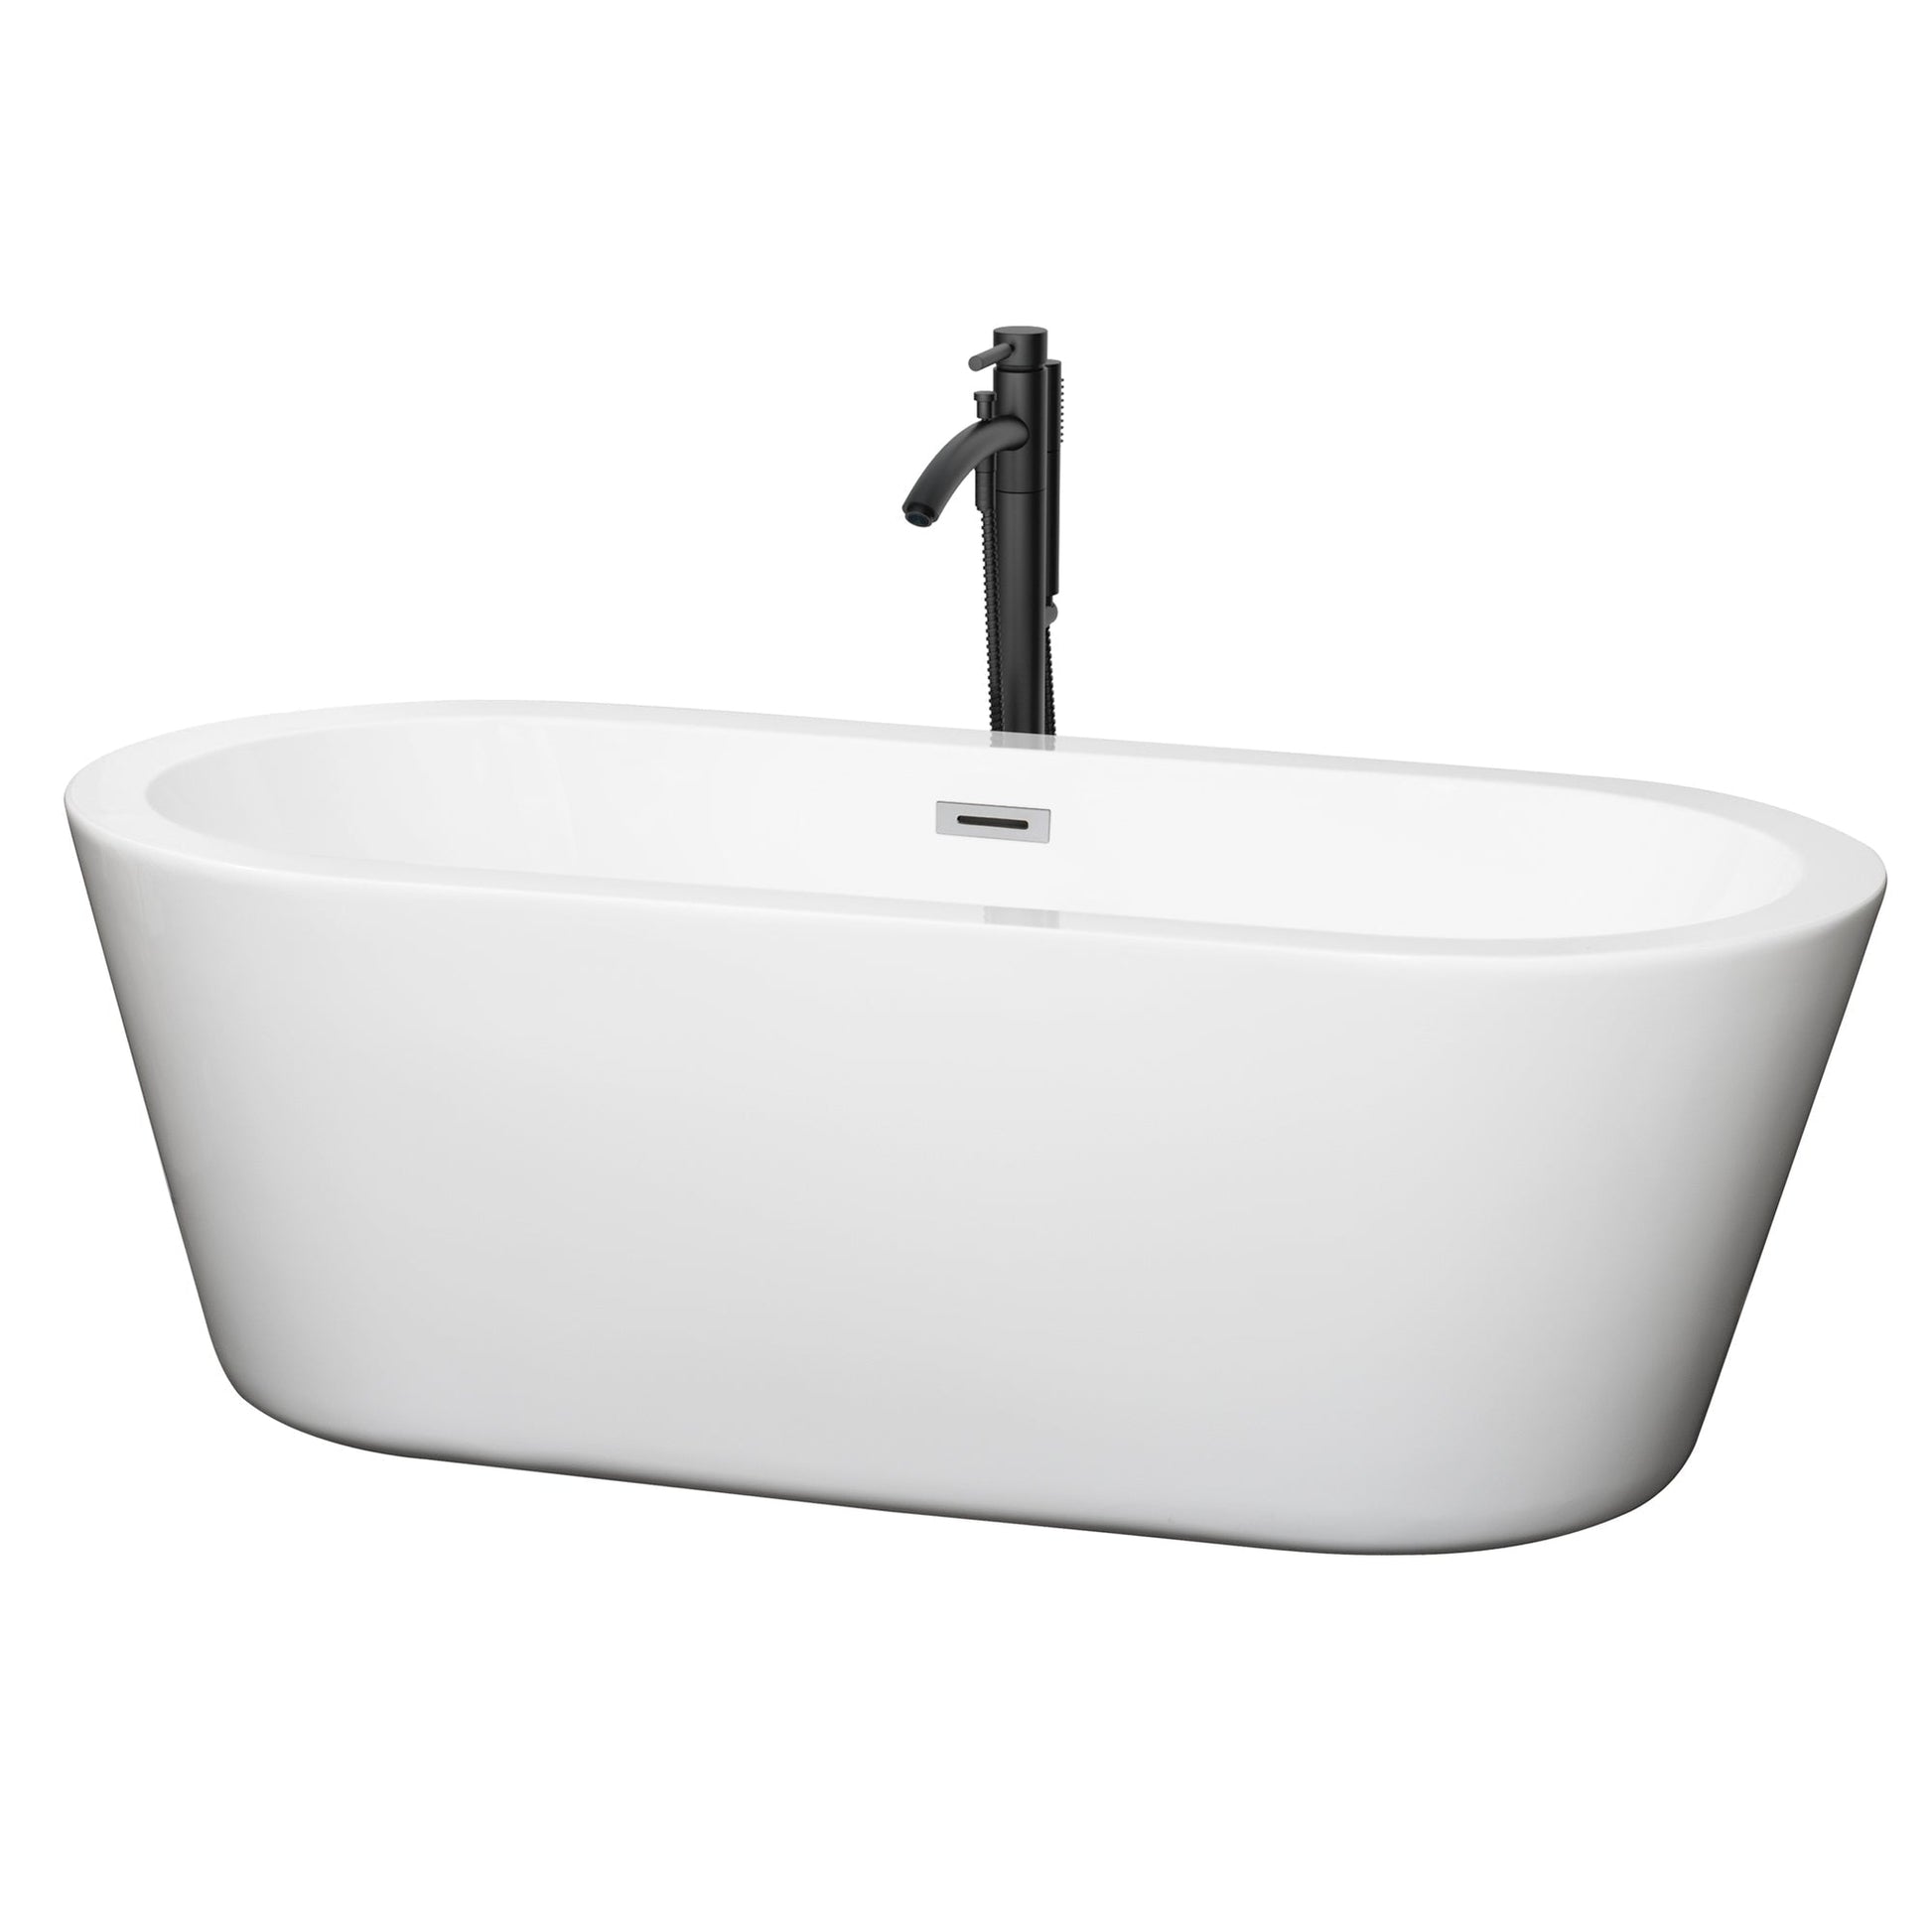 Wyndham Collection Mermaid 67" Freestanding Bathtub in White With Polished Chrome Trim and Floor Mounted Faucet in Matte Black